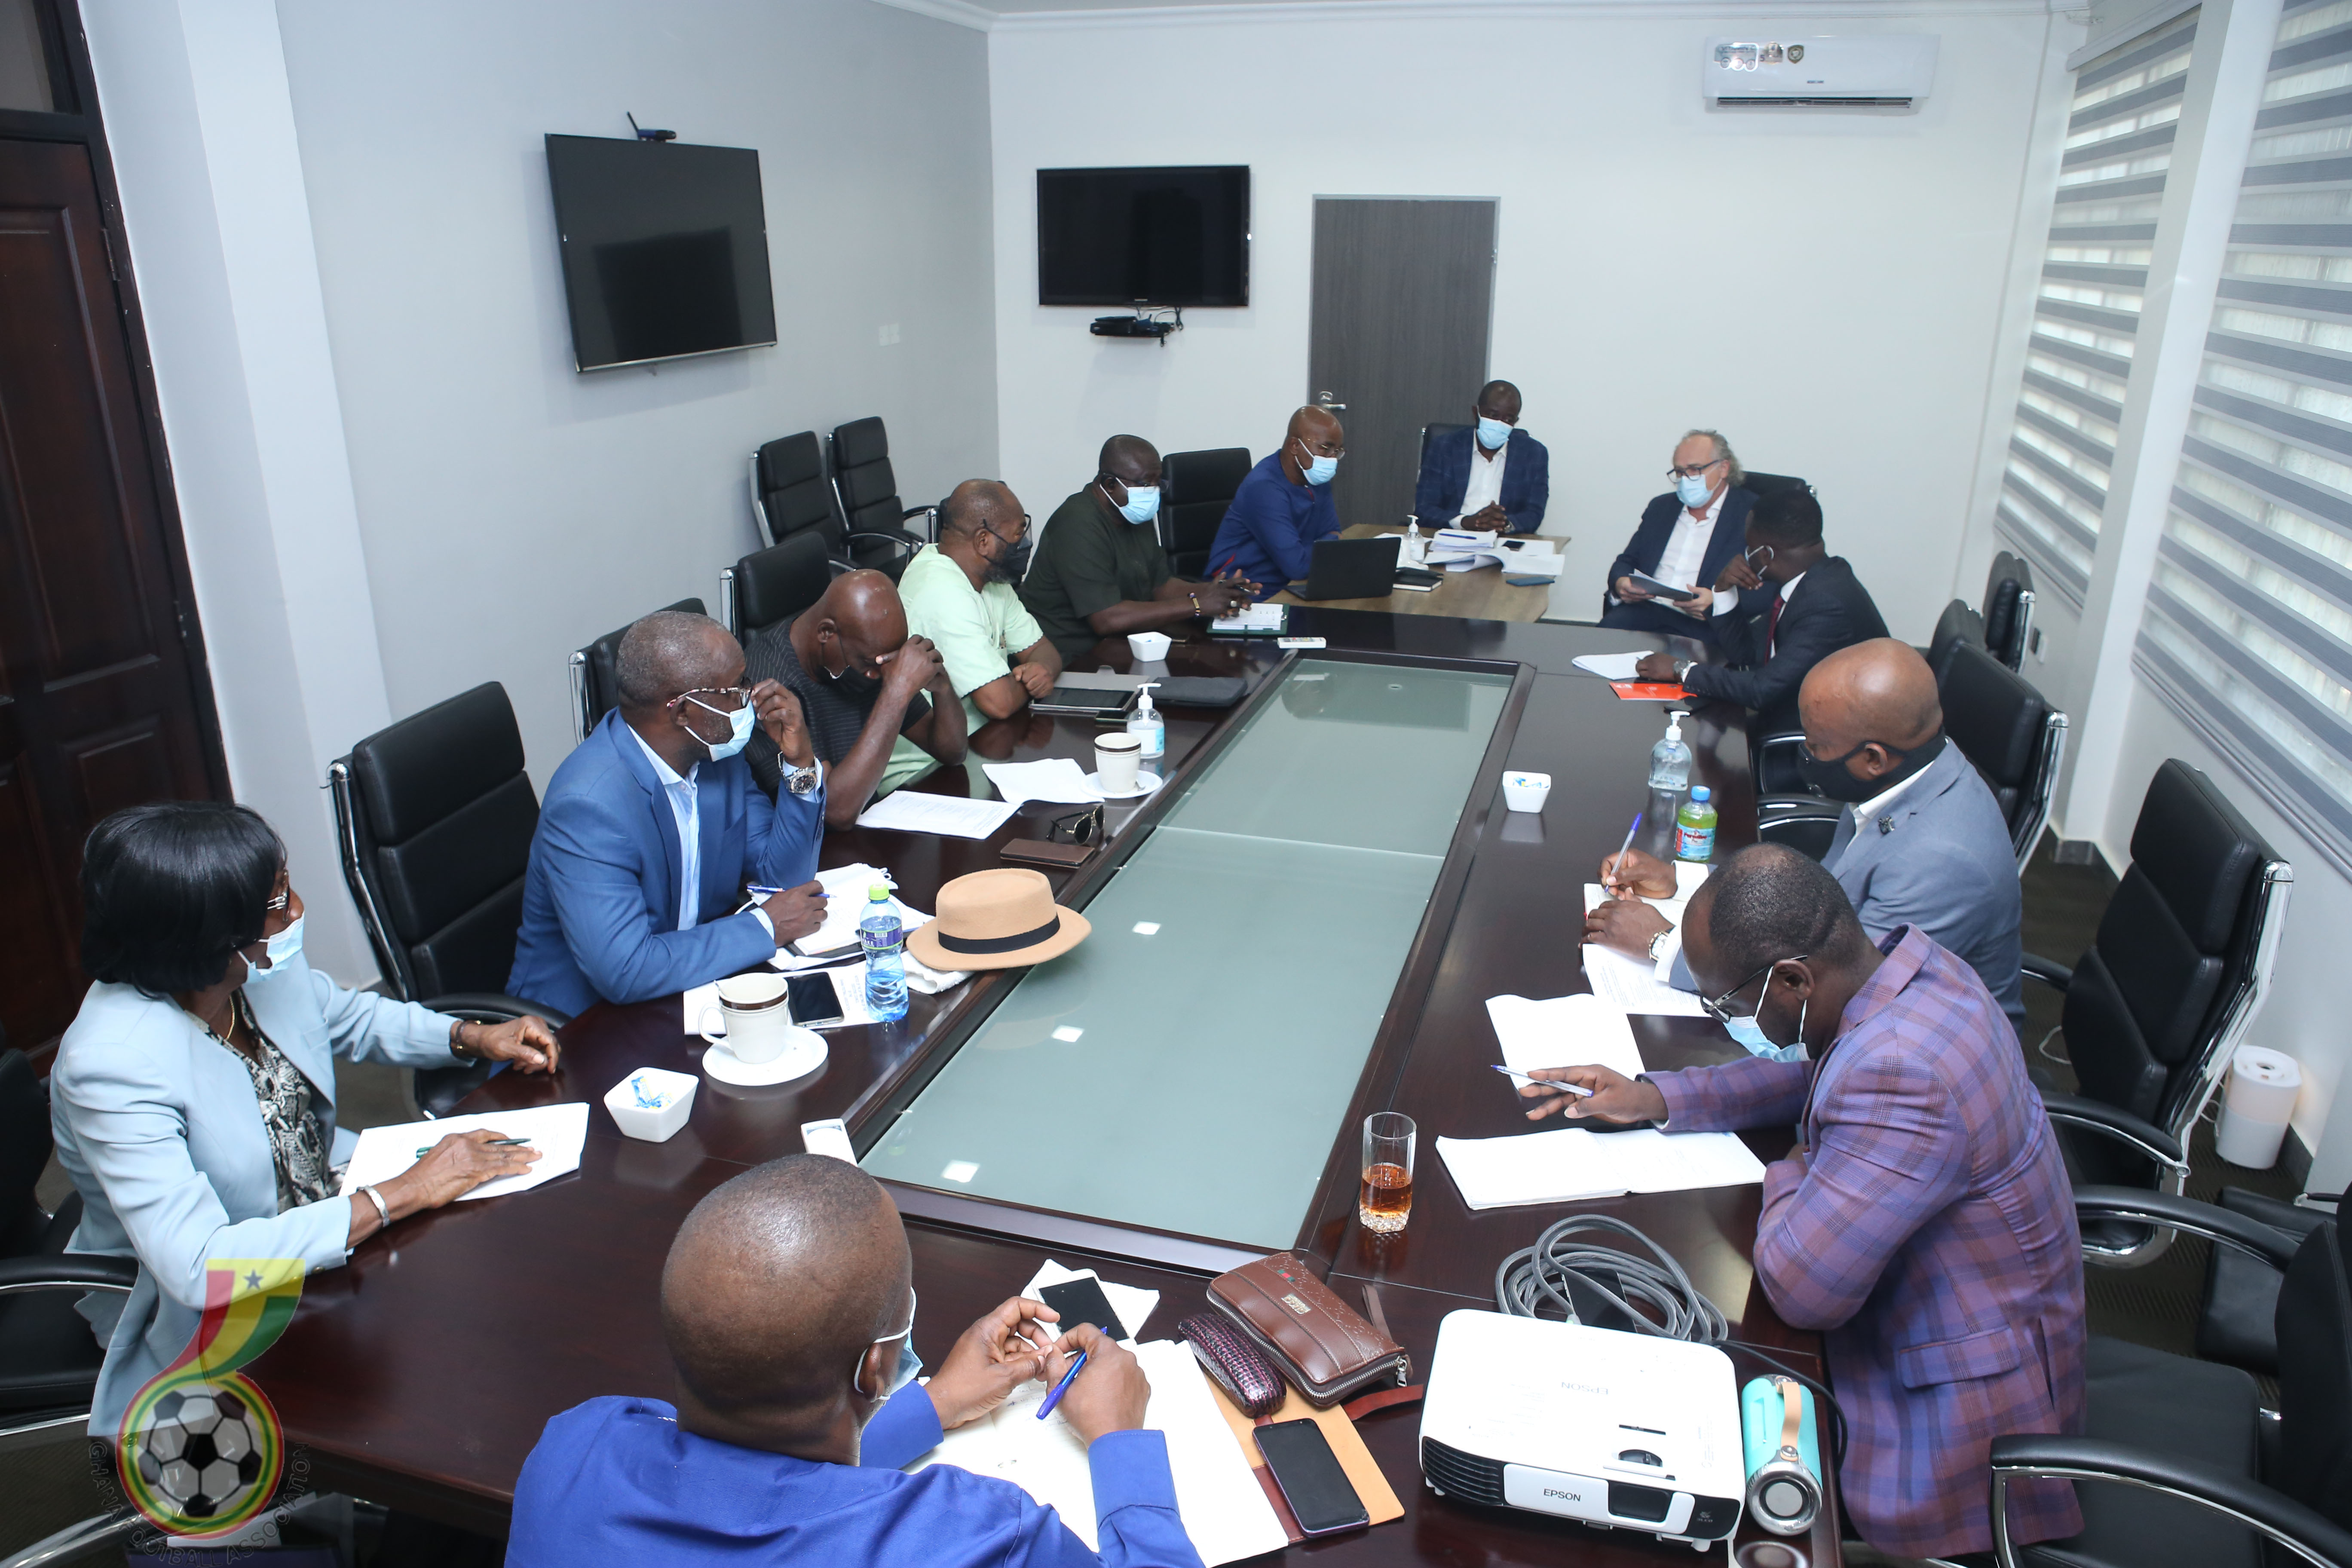 GFA to introduce referee assessors, indepemdent observers for GPL second round